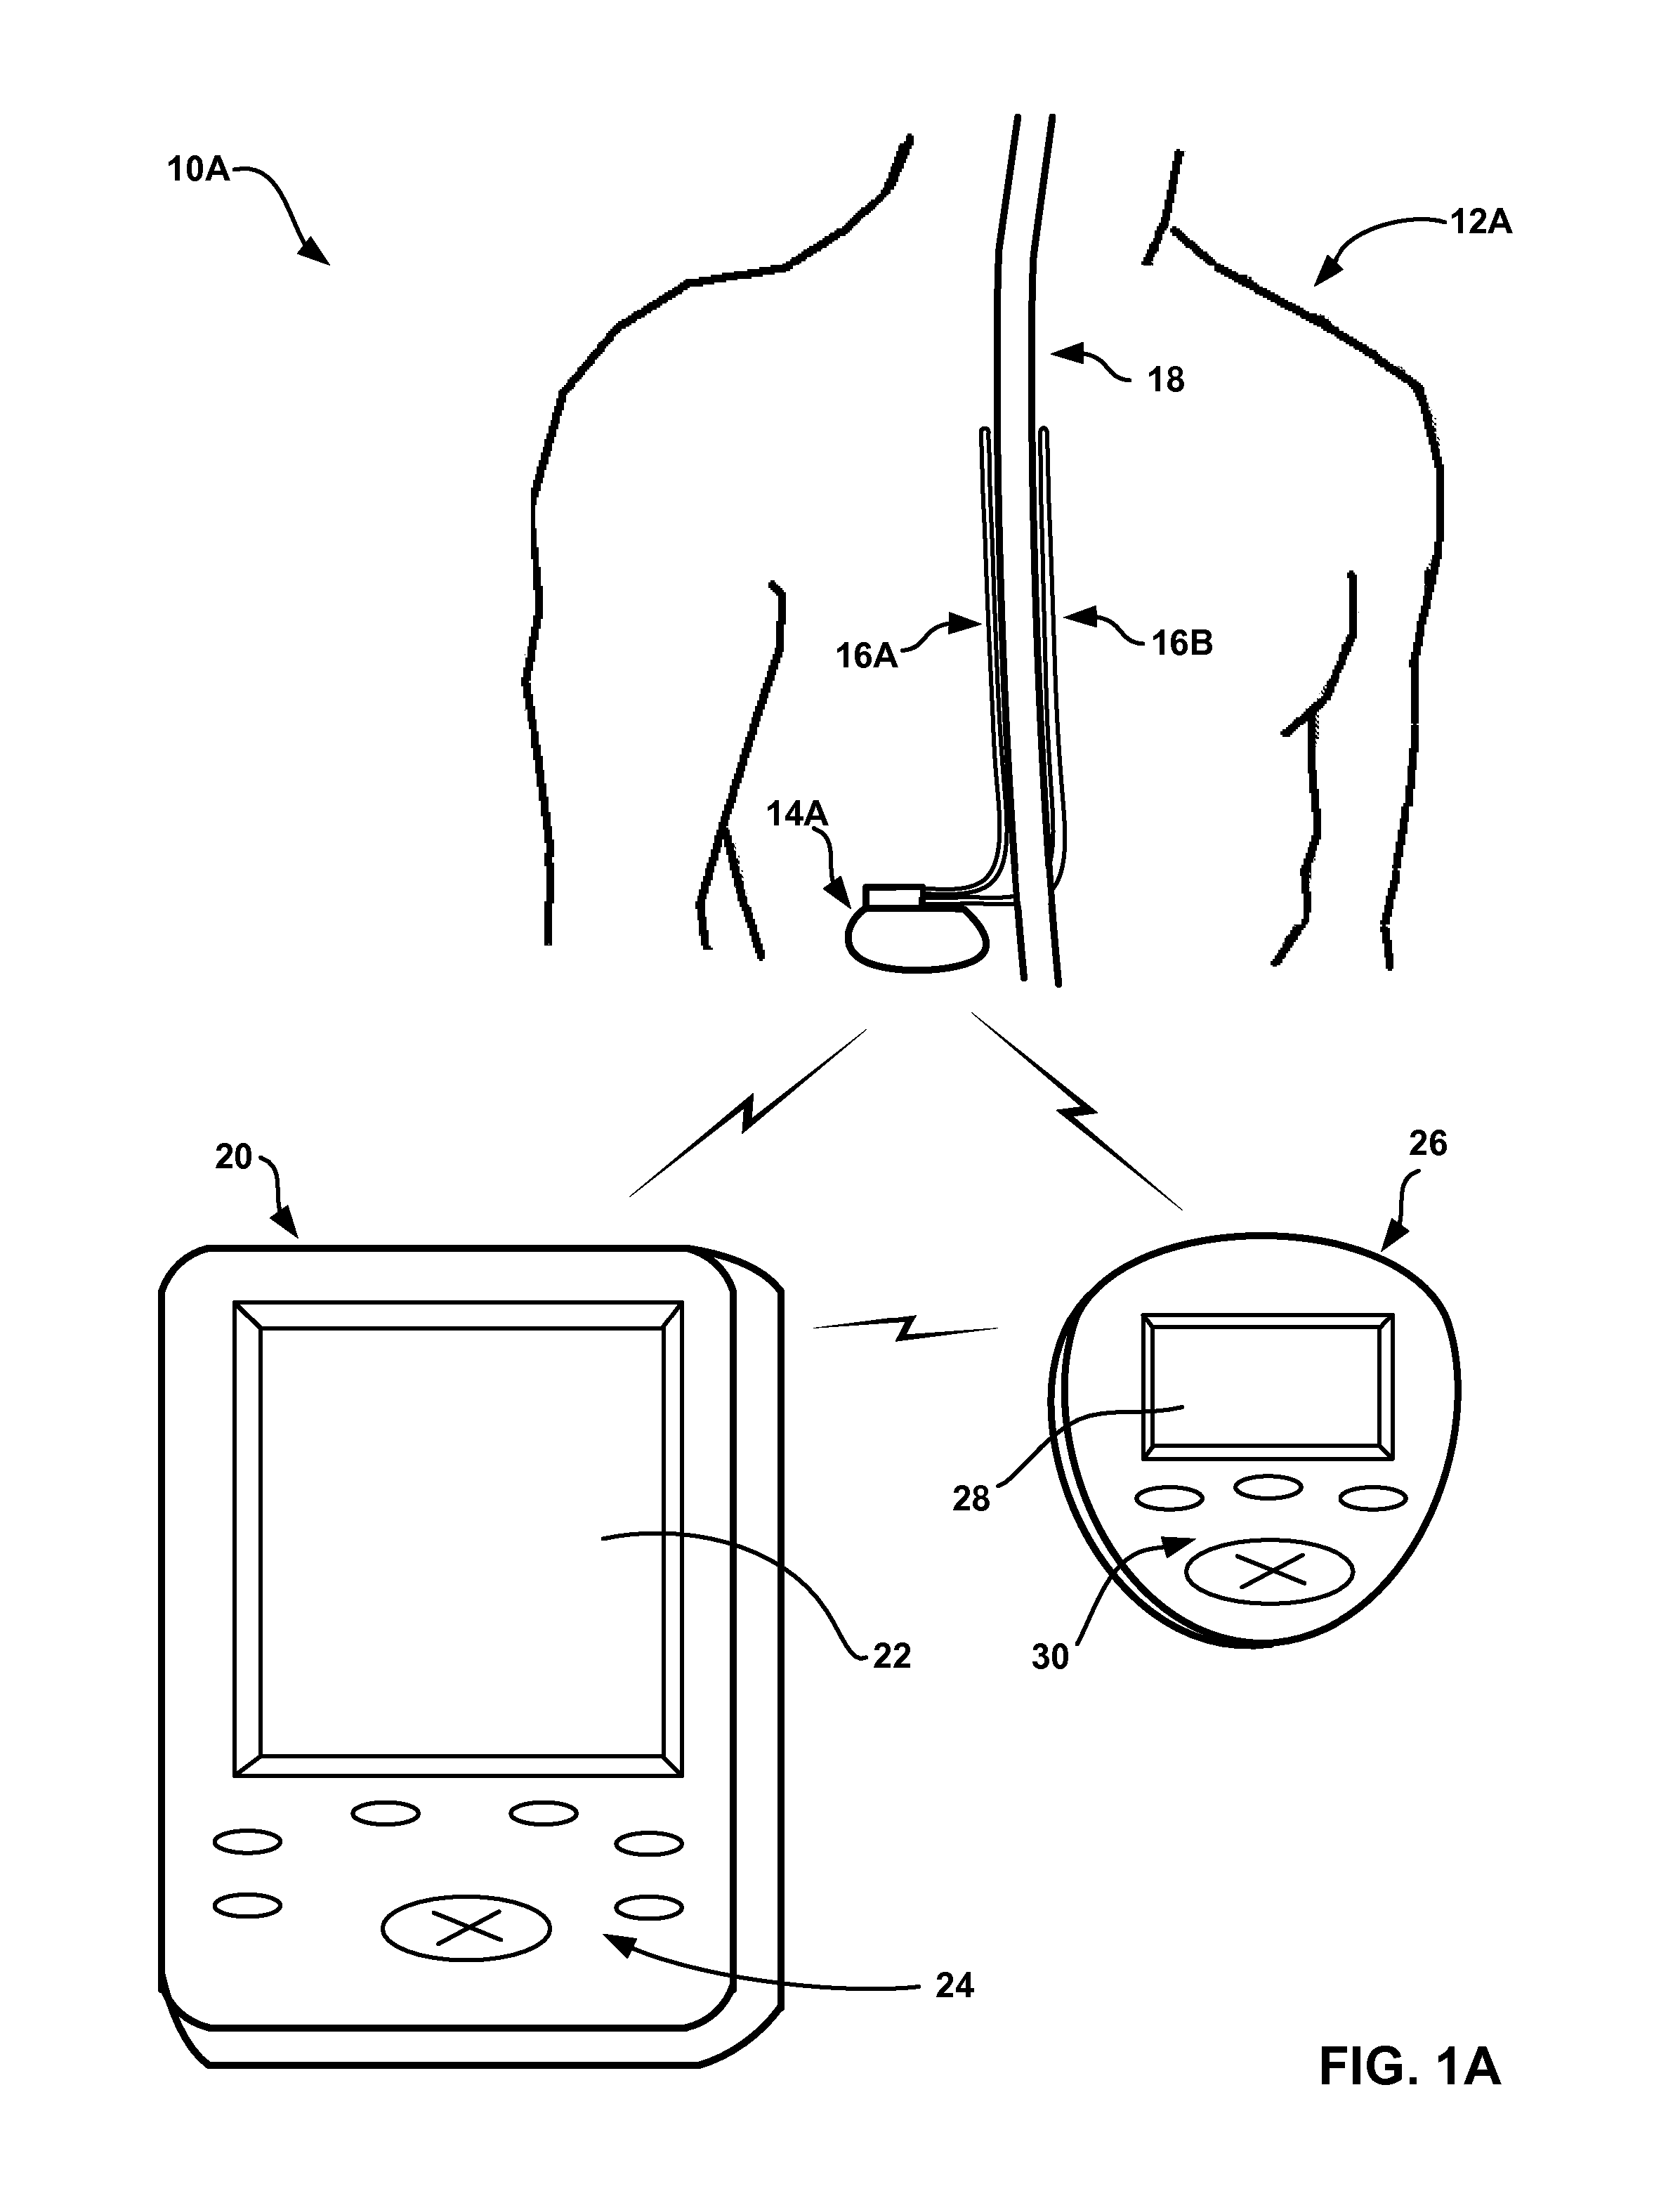 Collecting activity and sleep quality information via a medical device